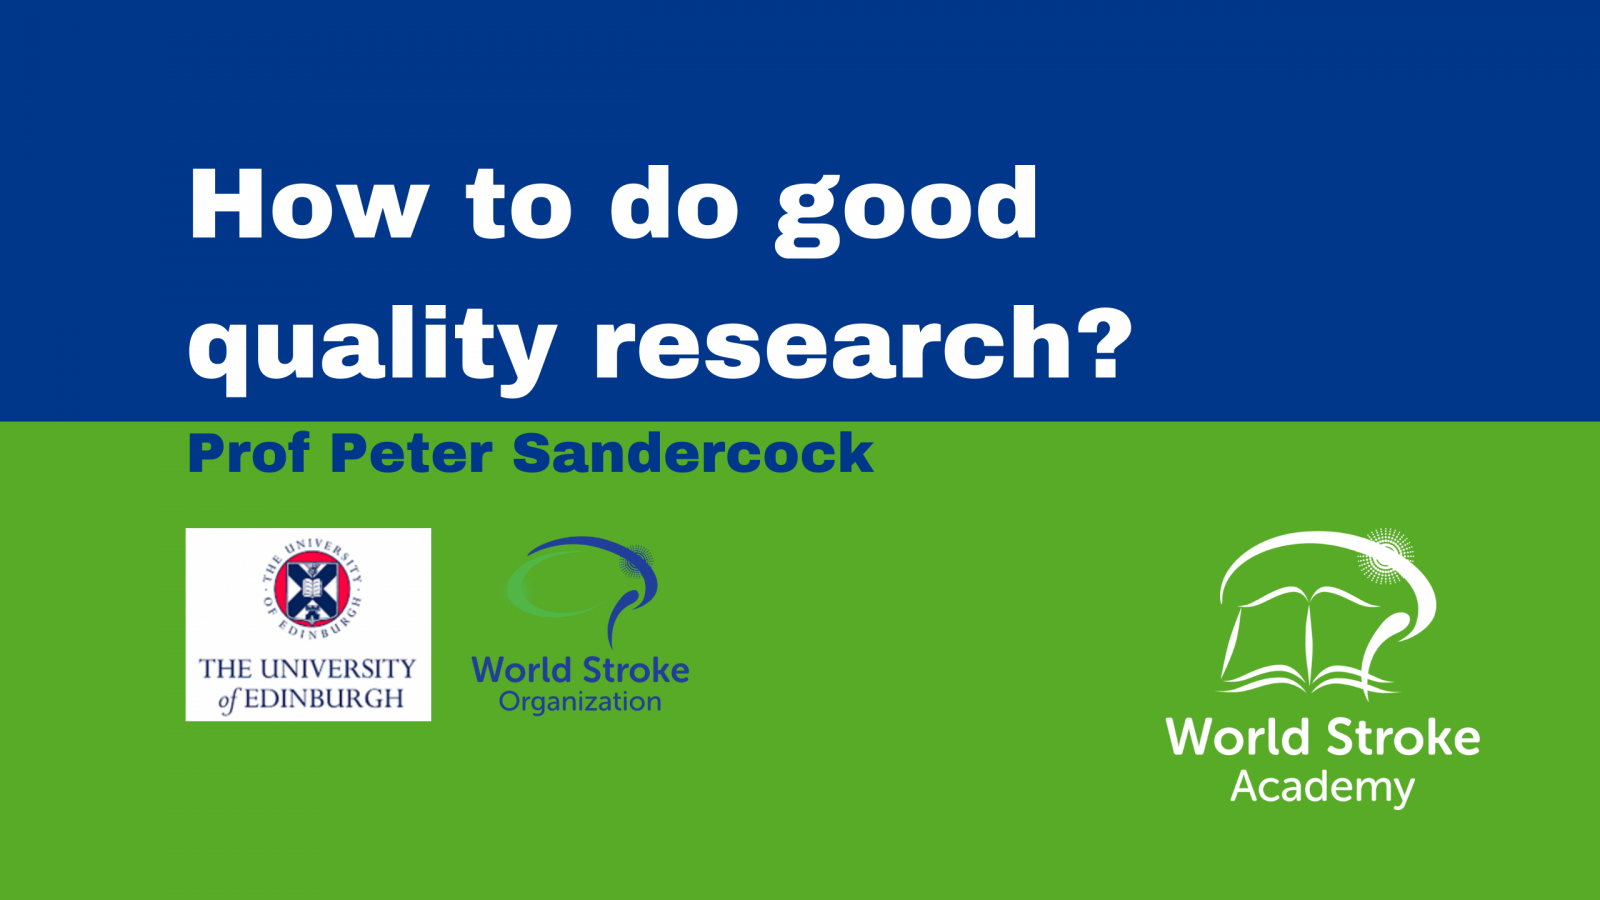 How to do good quality research?